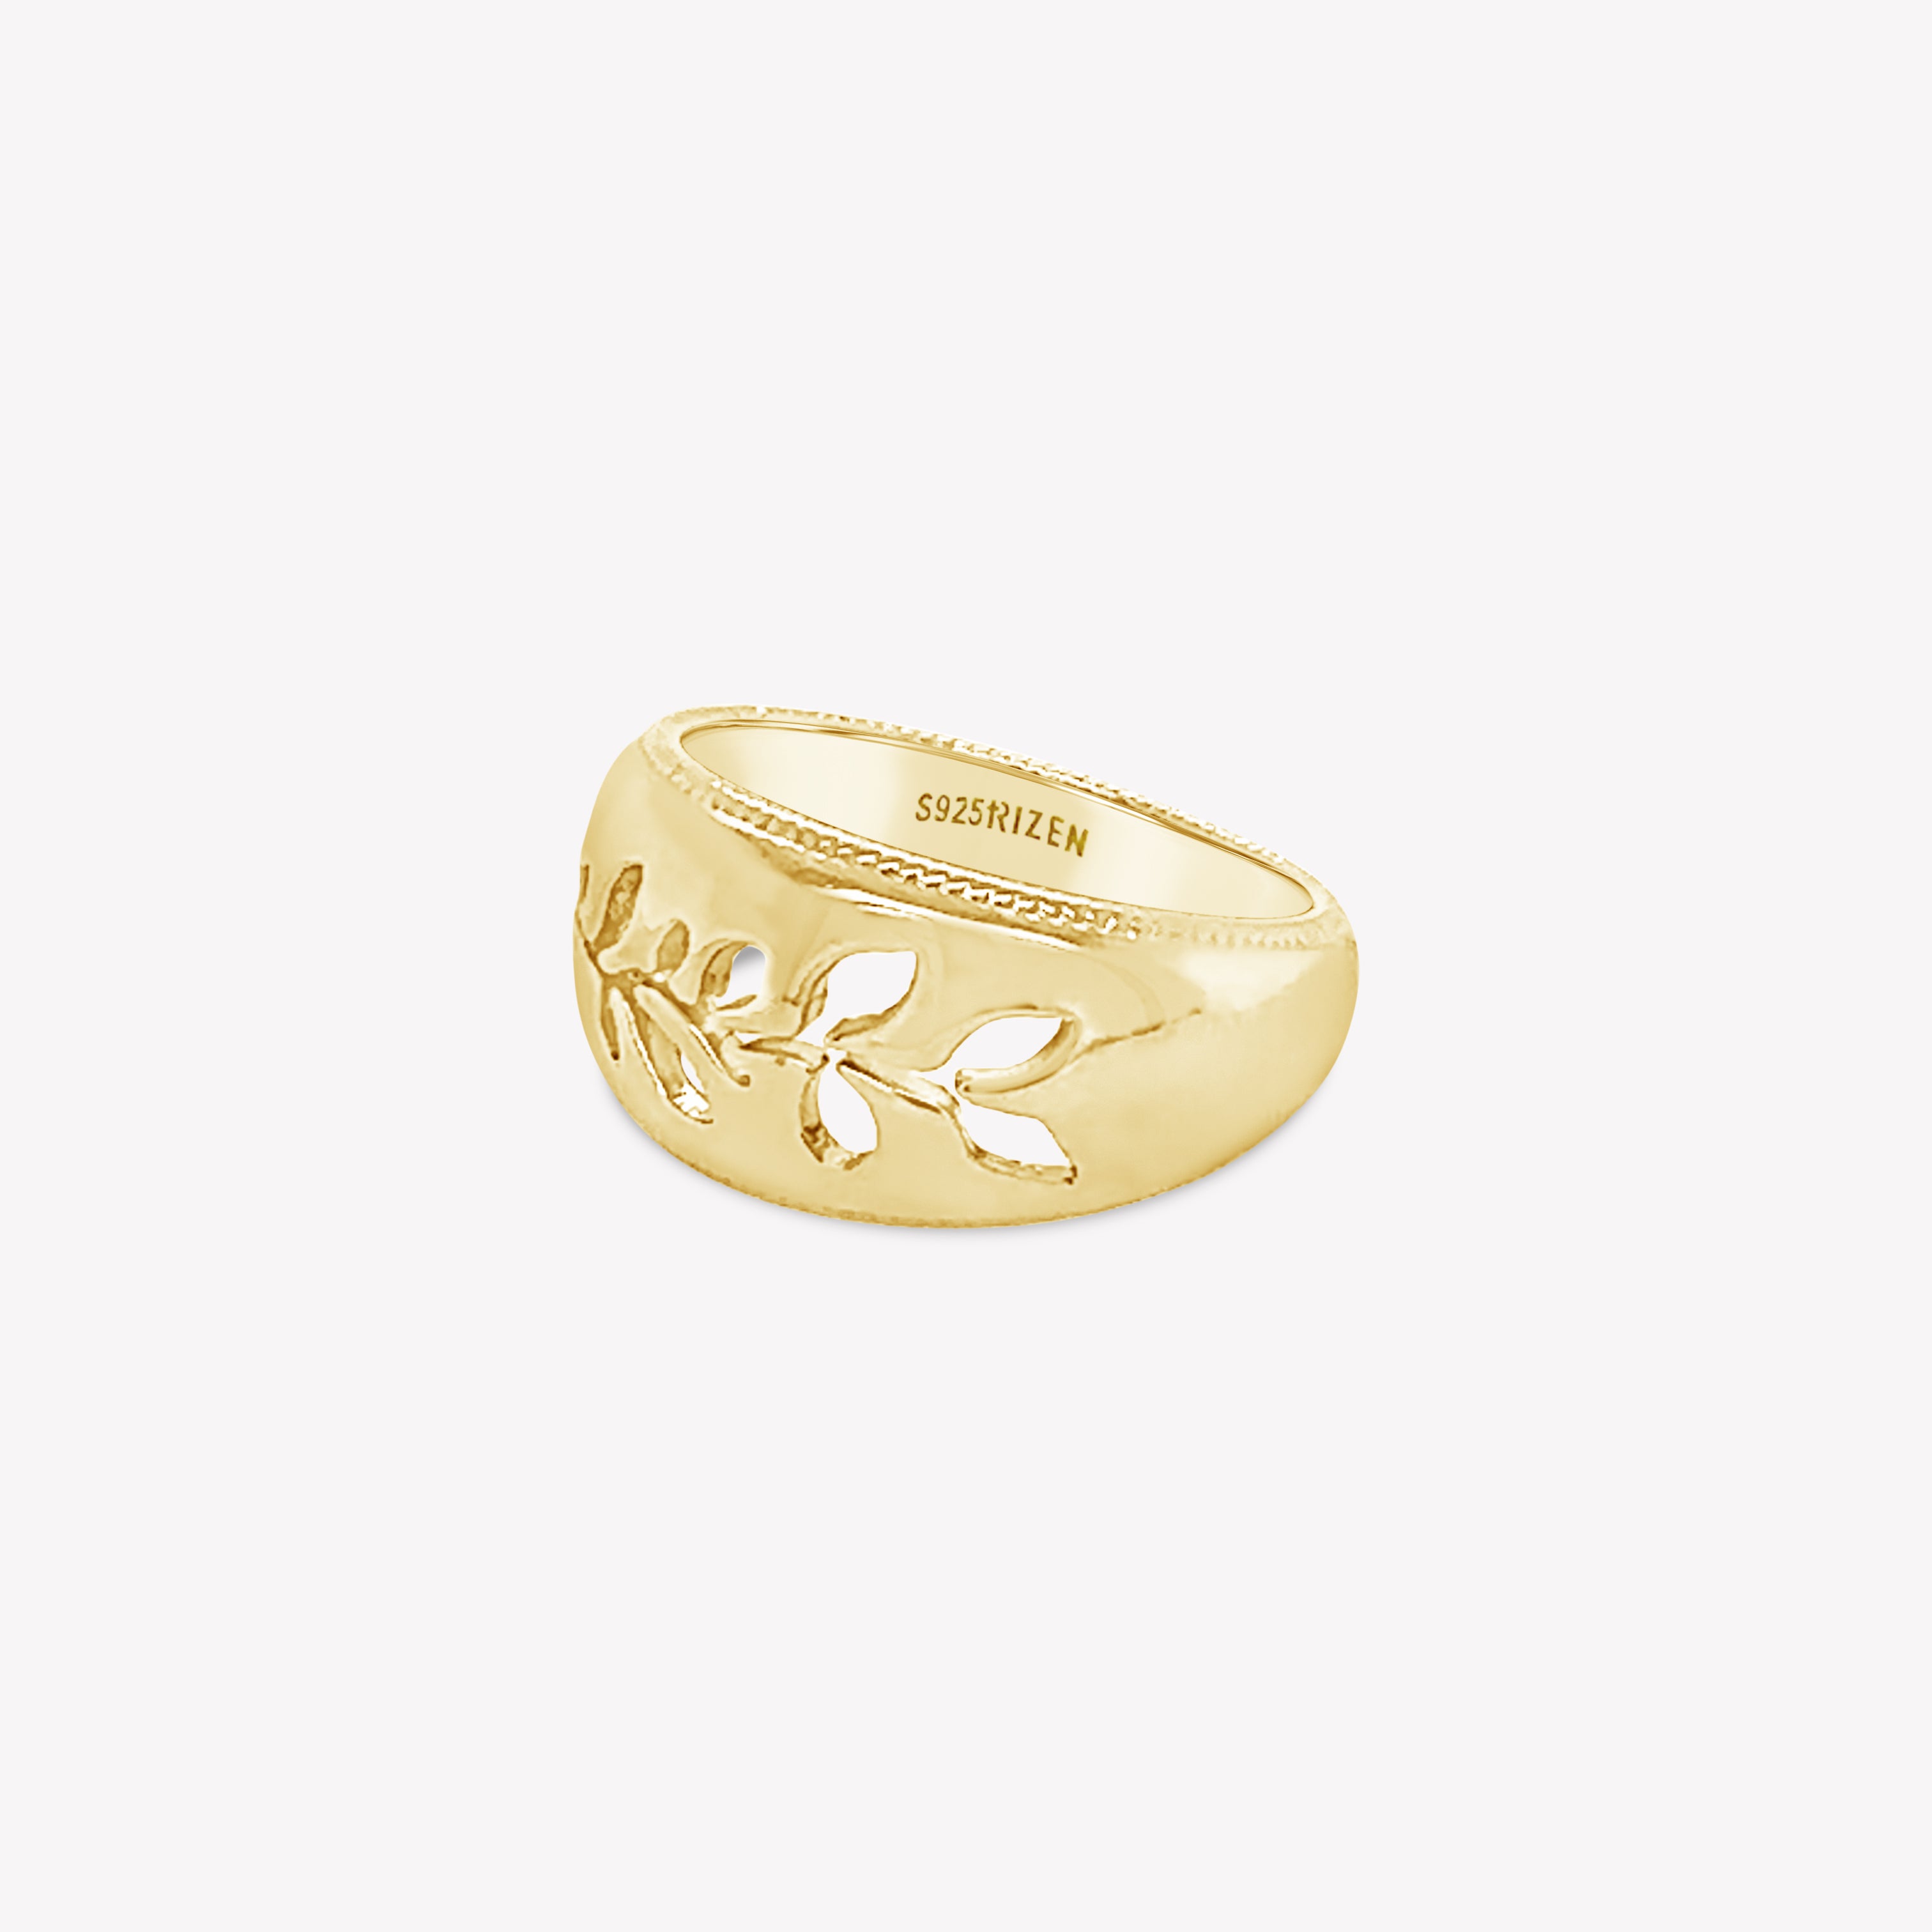 Intricately designed Olive Branch Ring in 18k gold vermeil from the Rooted Collection by Rizen Jewelry.